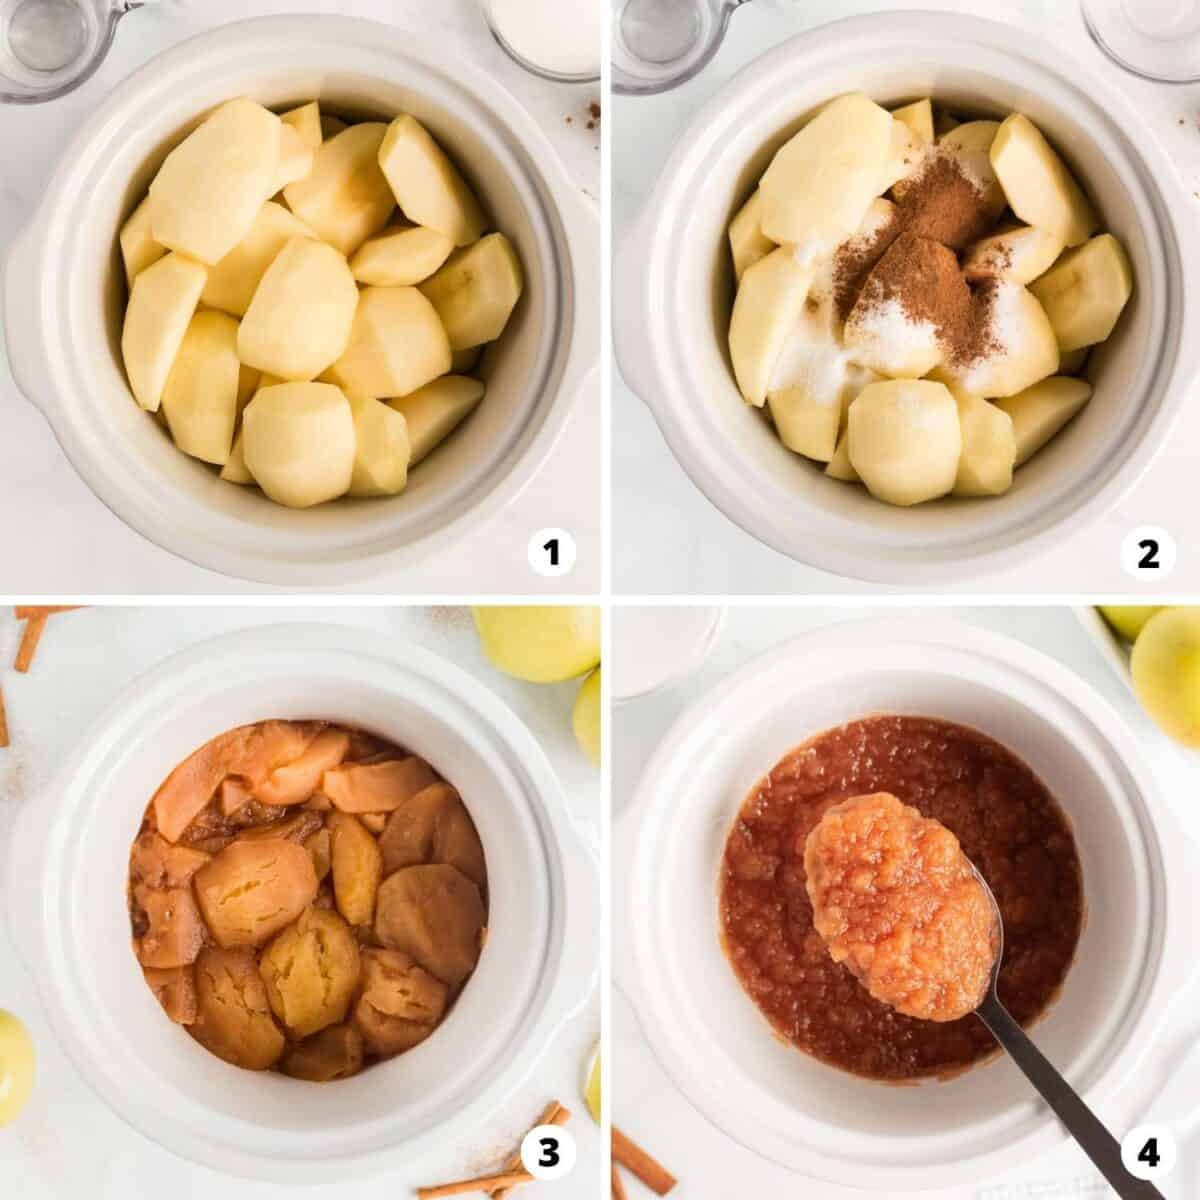 Showing how to make applesauce in a 4 step collage.